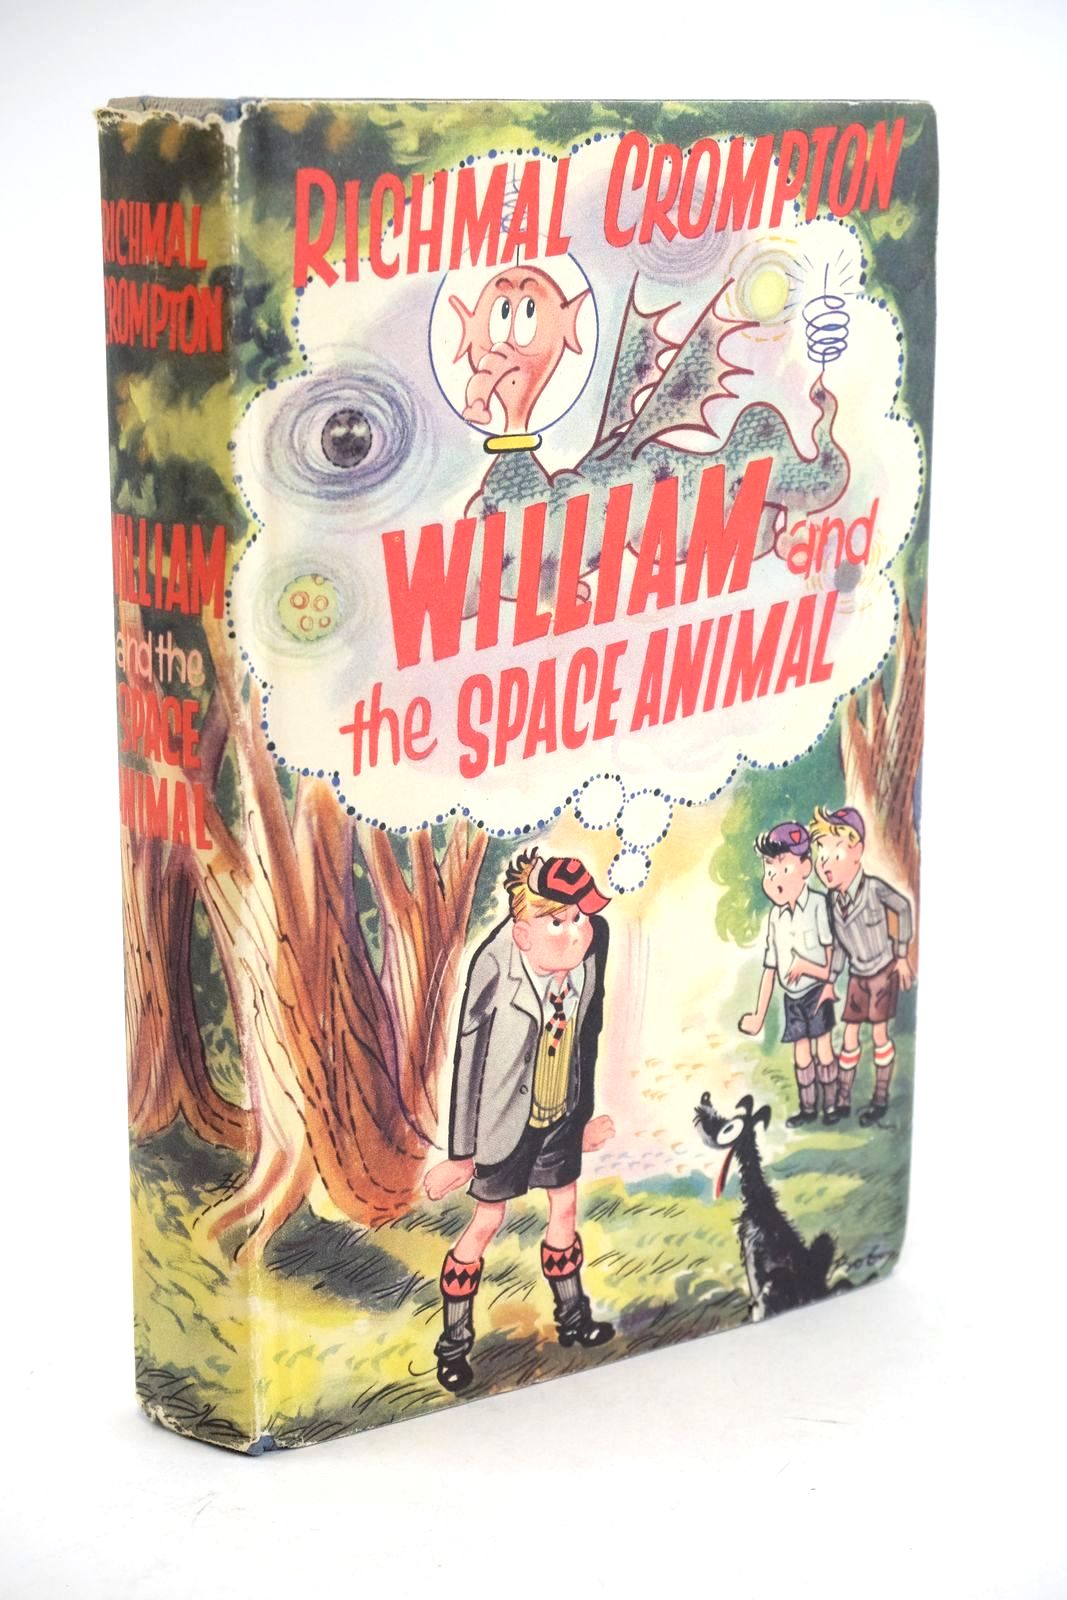 Photo of WILLIAM AND THE SPACE ANIMAL written by Crompton, Richmal illustrated by Henry, Thomas published by The Children's Book Club (STOCK CODE: 1324555)  for sale by Stella & Rose's Books